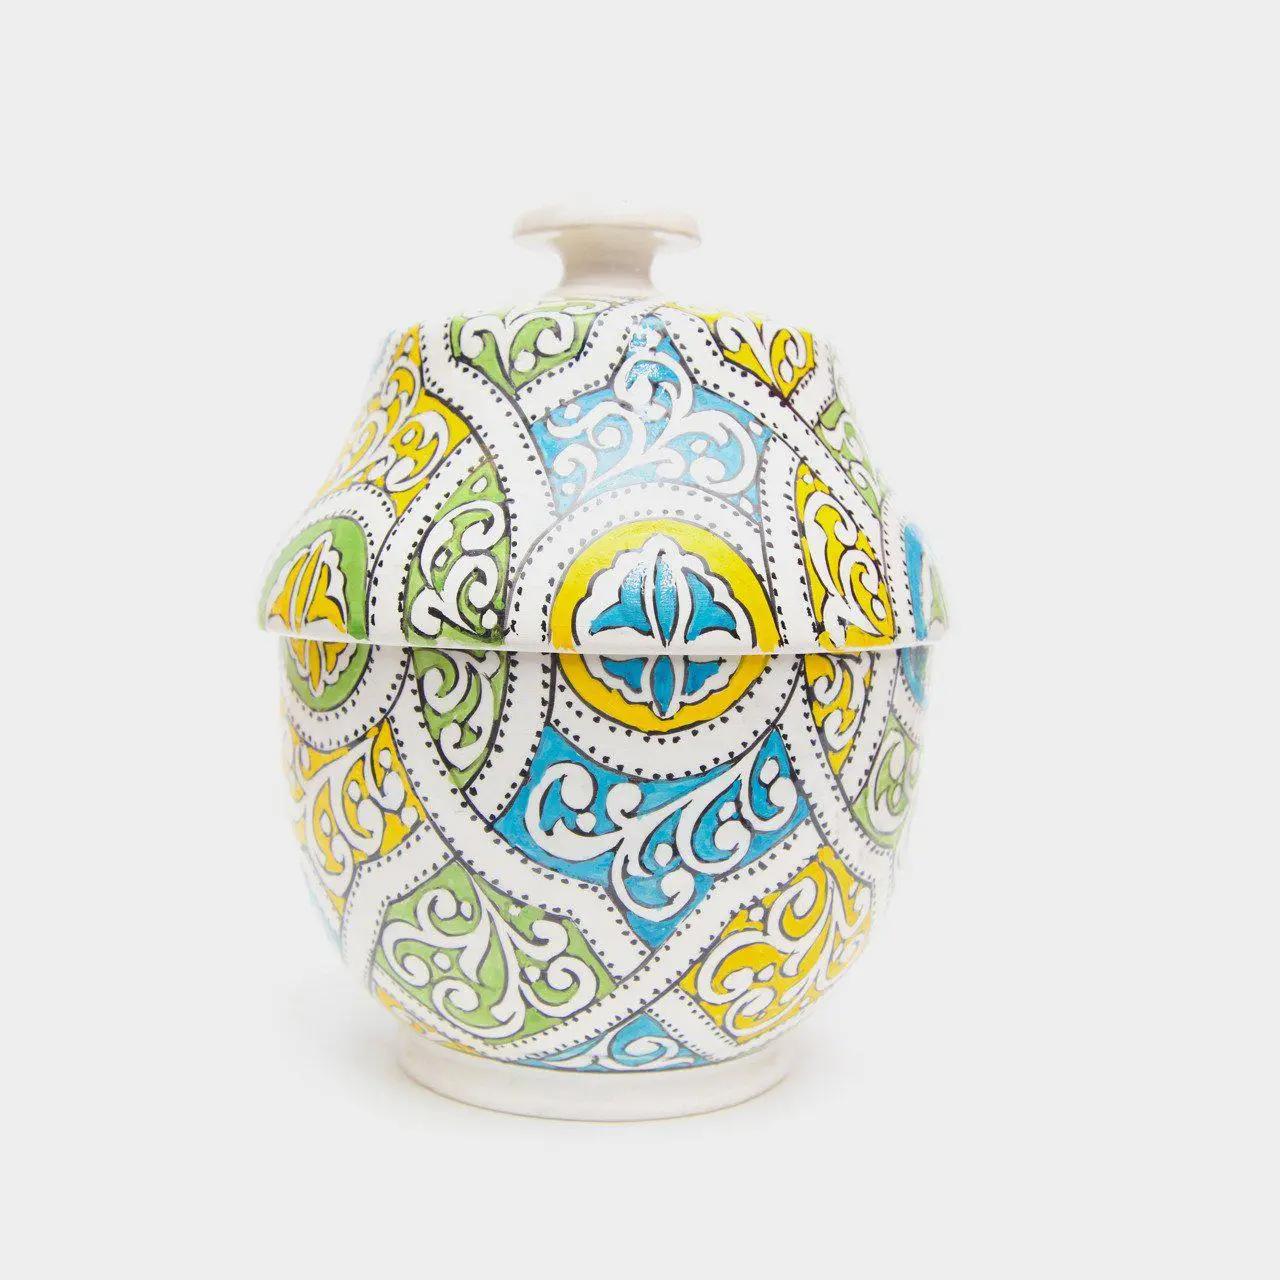 This entrancing Moroccan urn or jar is a dazzling example of tradition-based craftsmanship. Made from high-quality white ceramic (similar to porcelain) and boasting an ornate, hand-painted arabesque motif in turquoise, yellow and green, these jars